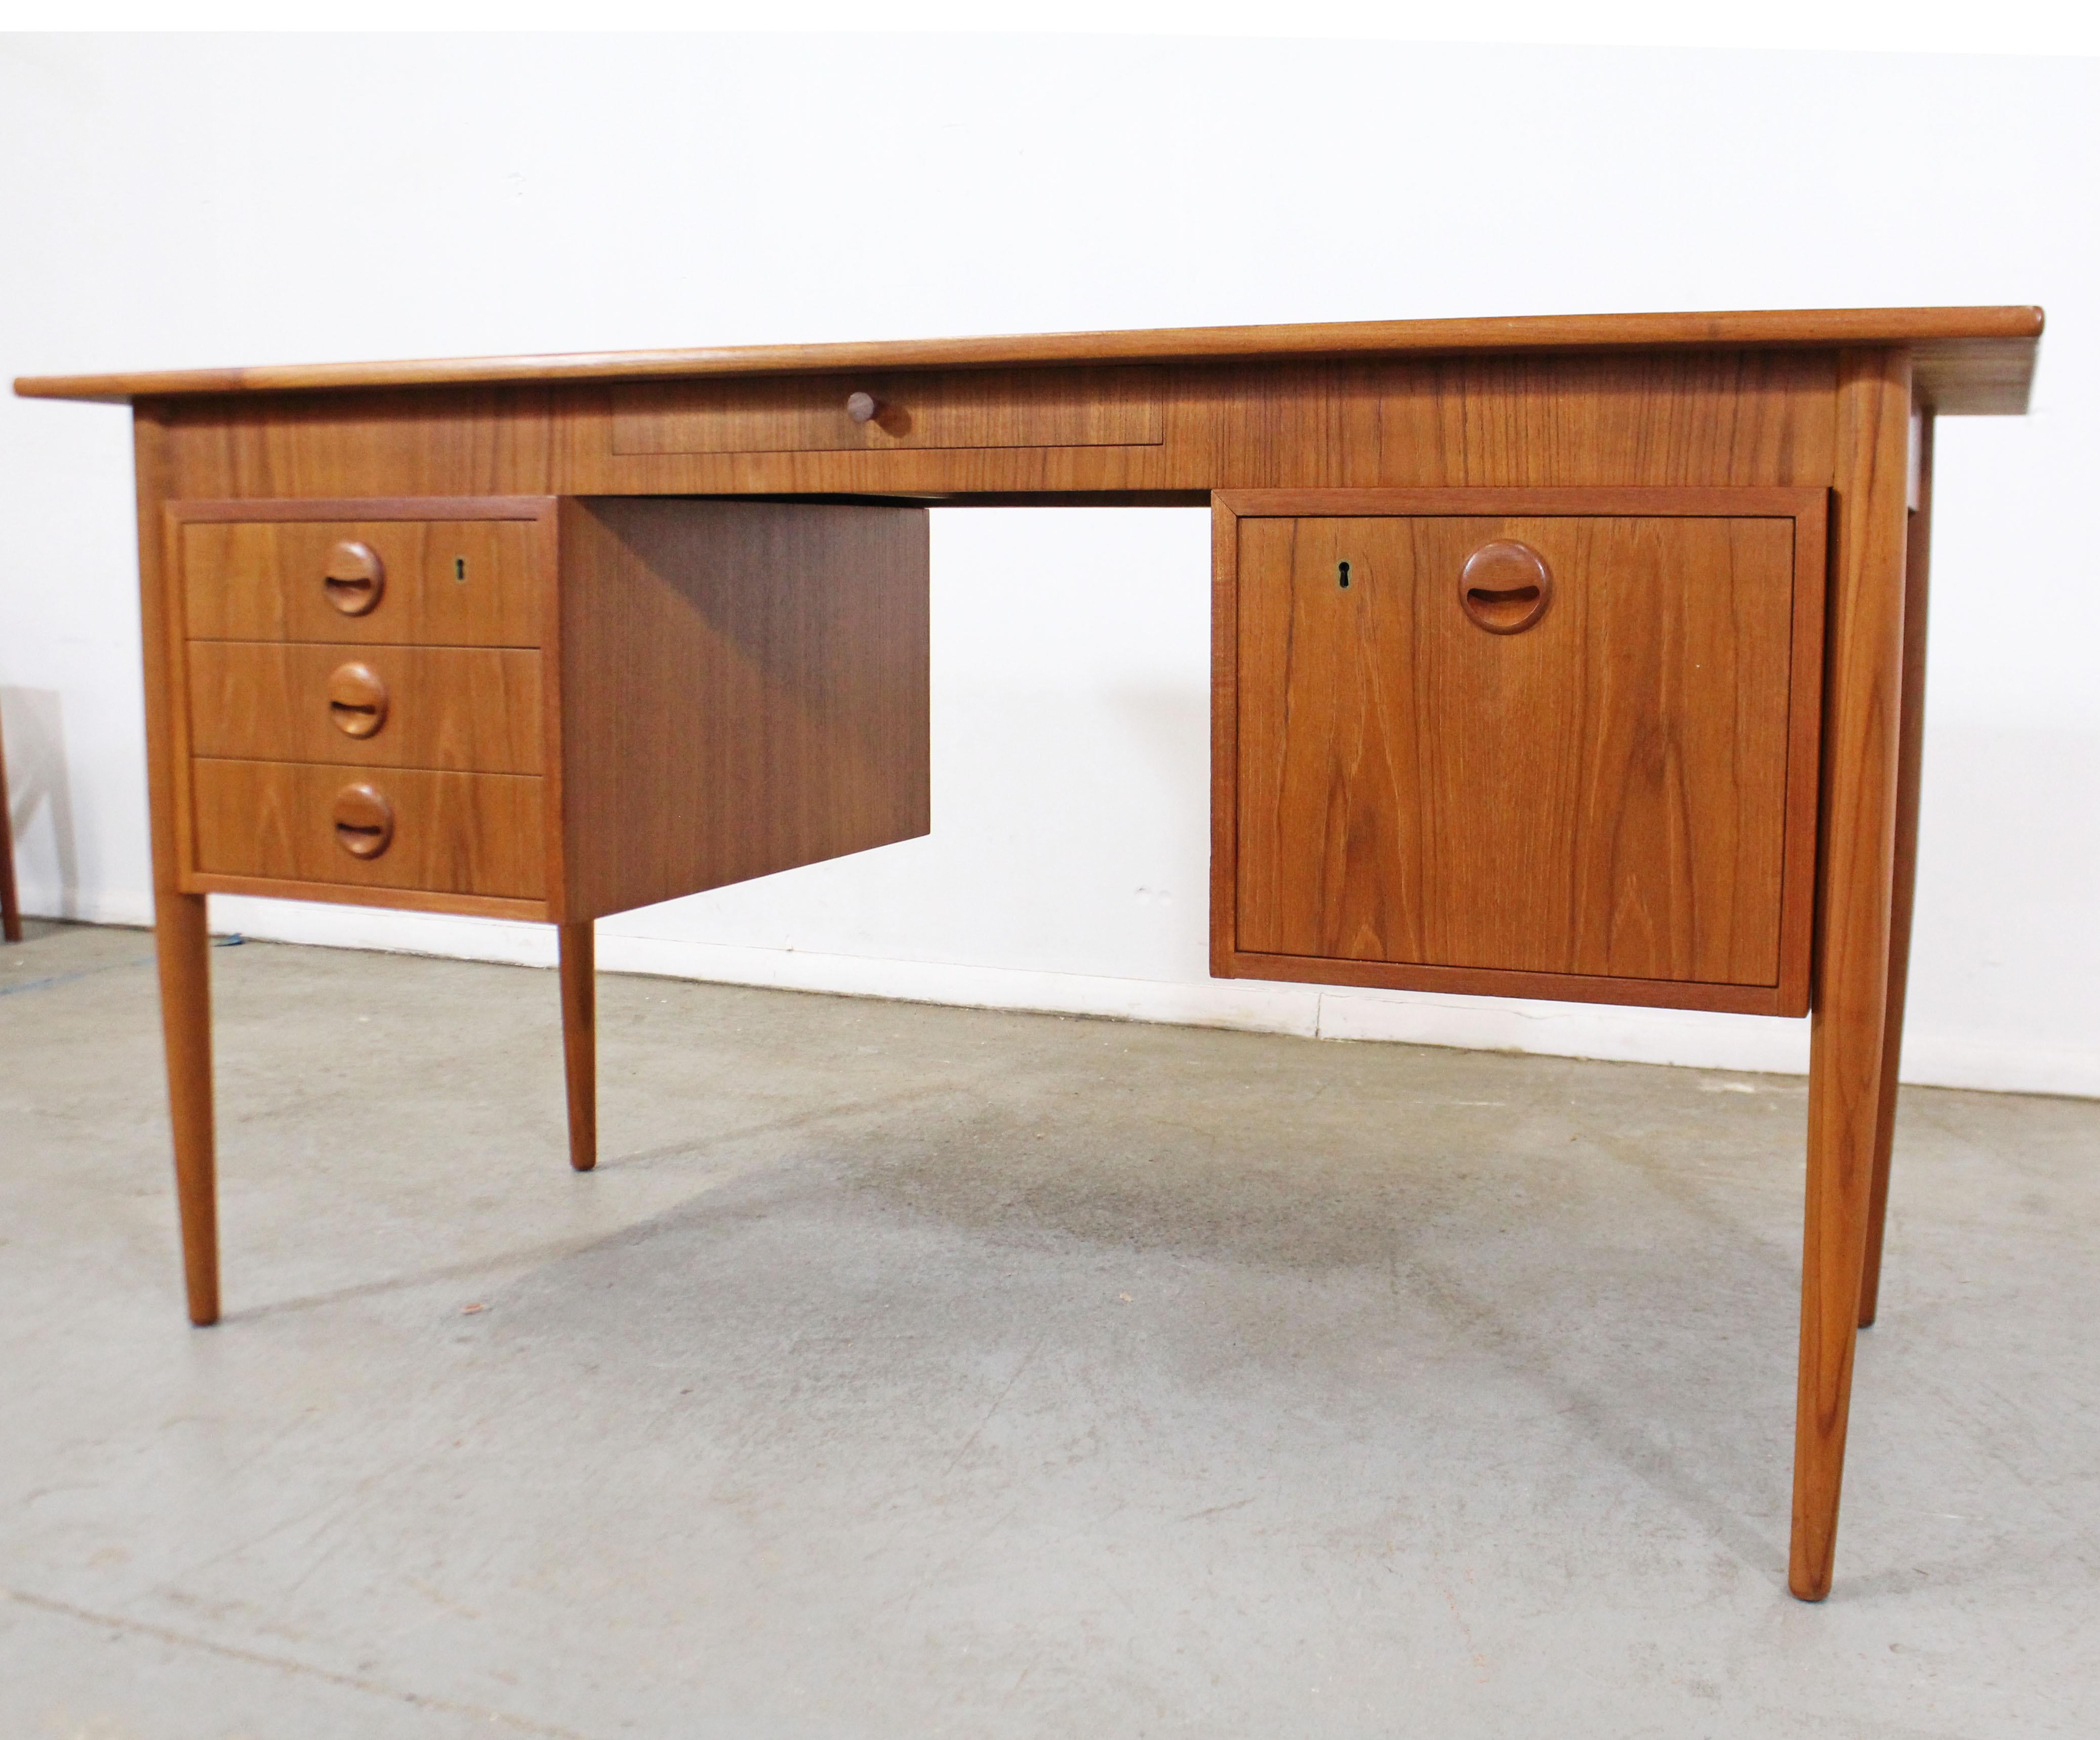 Offered is a super cool Danish modern teak desk by Svenstrup J for AP Mobler. This desk has one large file drawer, three smaller drawers, and one center drawer. In excellent condition for its age with some surface scratches and chips (see photos).